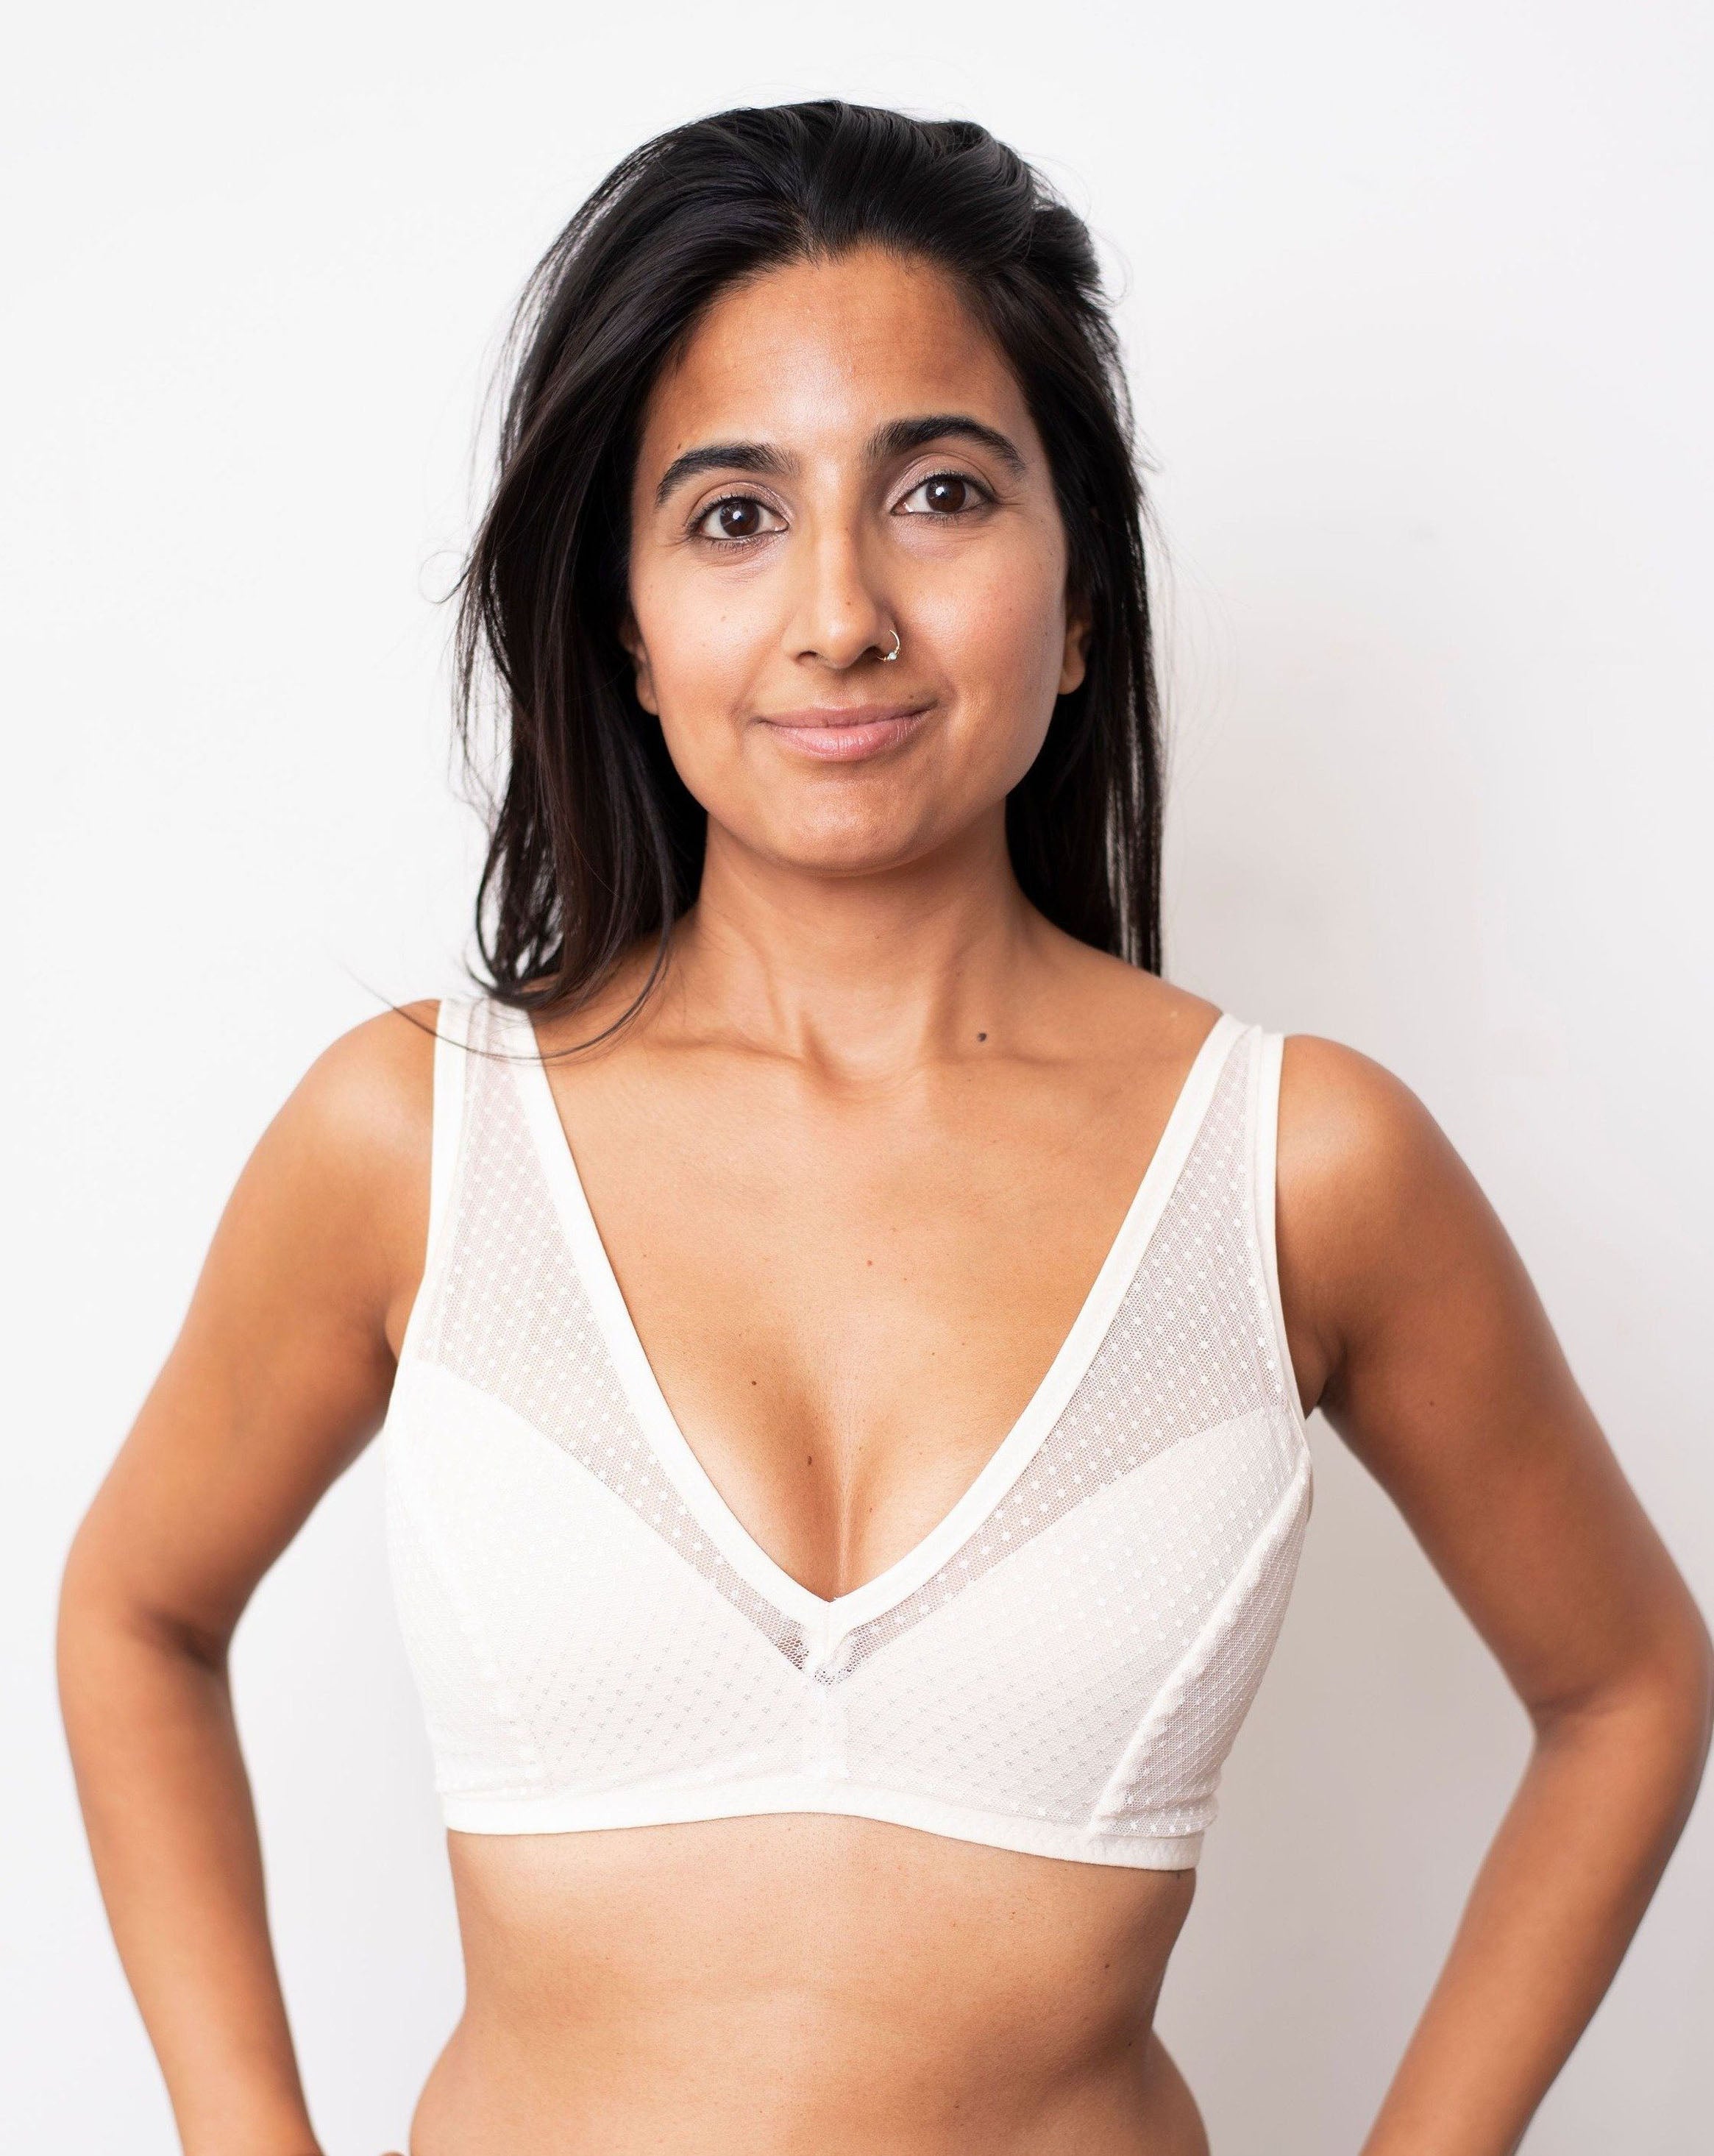 Ruhee from Rubies Bras, a female with long black hair is wearing an ivory dotted lace wirefree bra with deep plunge v neckline. Full front facing body shot on white background.